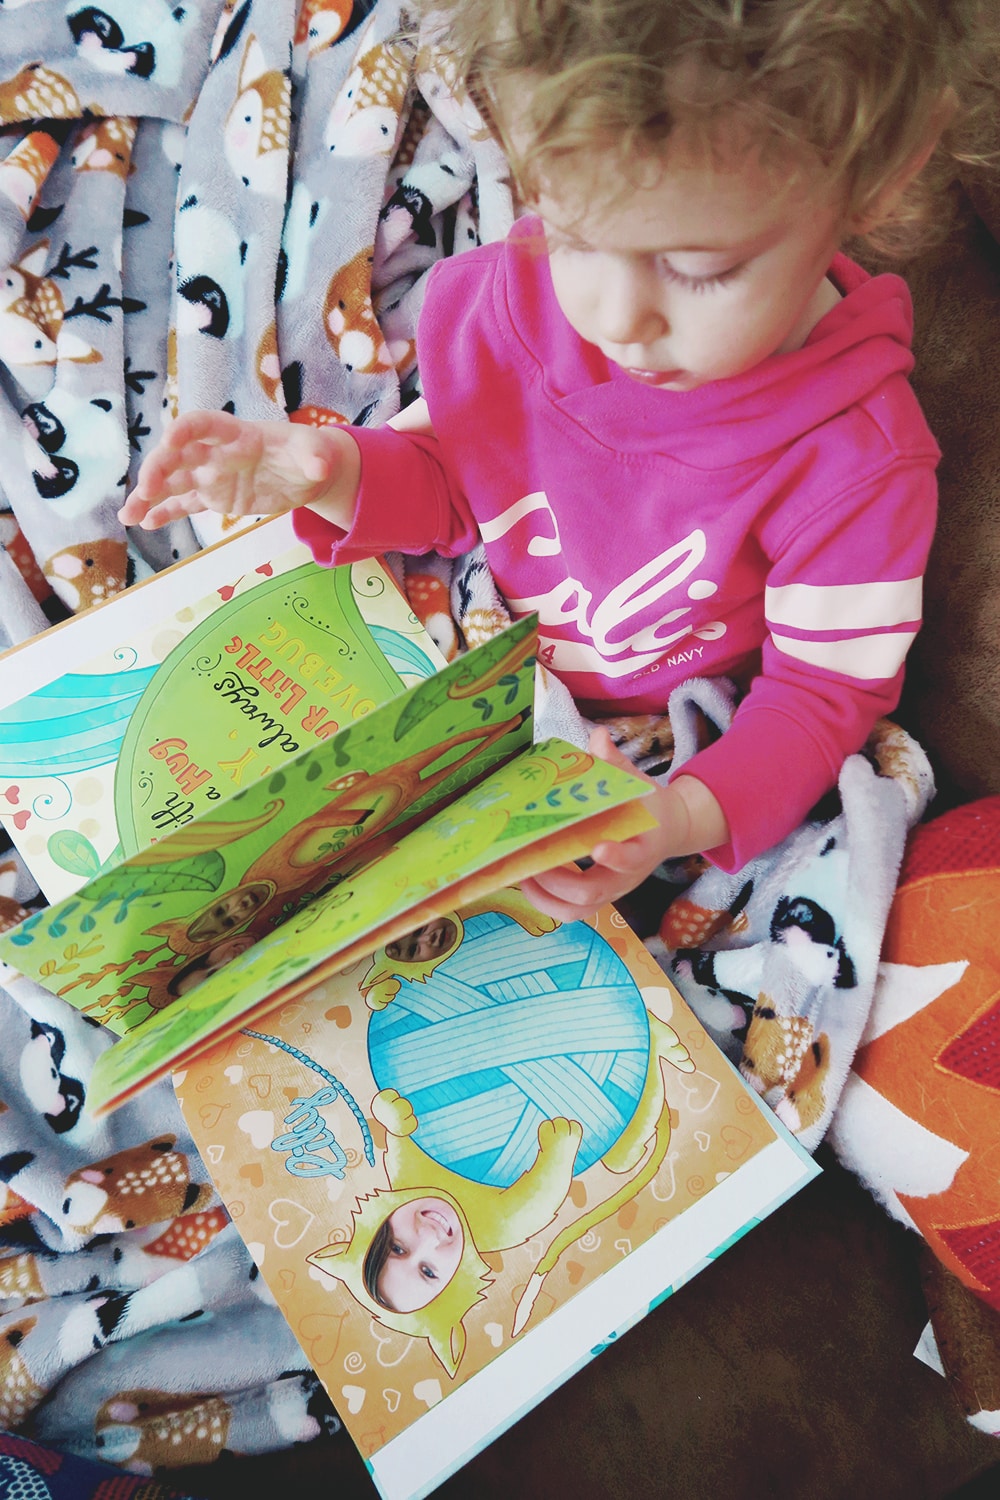 Looking for a personalized gift for your little one? My Little Lovebug book from I See Me is the perfect way to express your love!